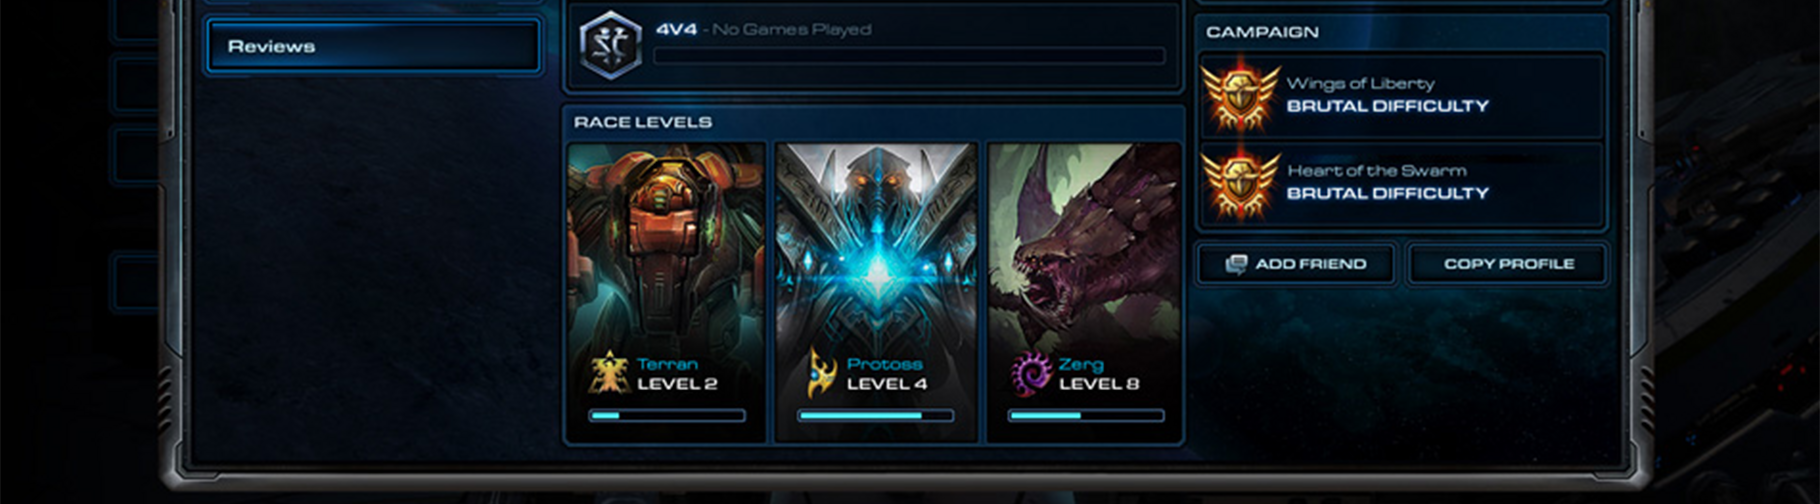 In-game image of Starcraft 2's player profile zoomed in on the race levels portion